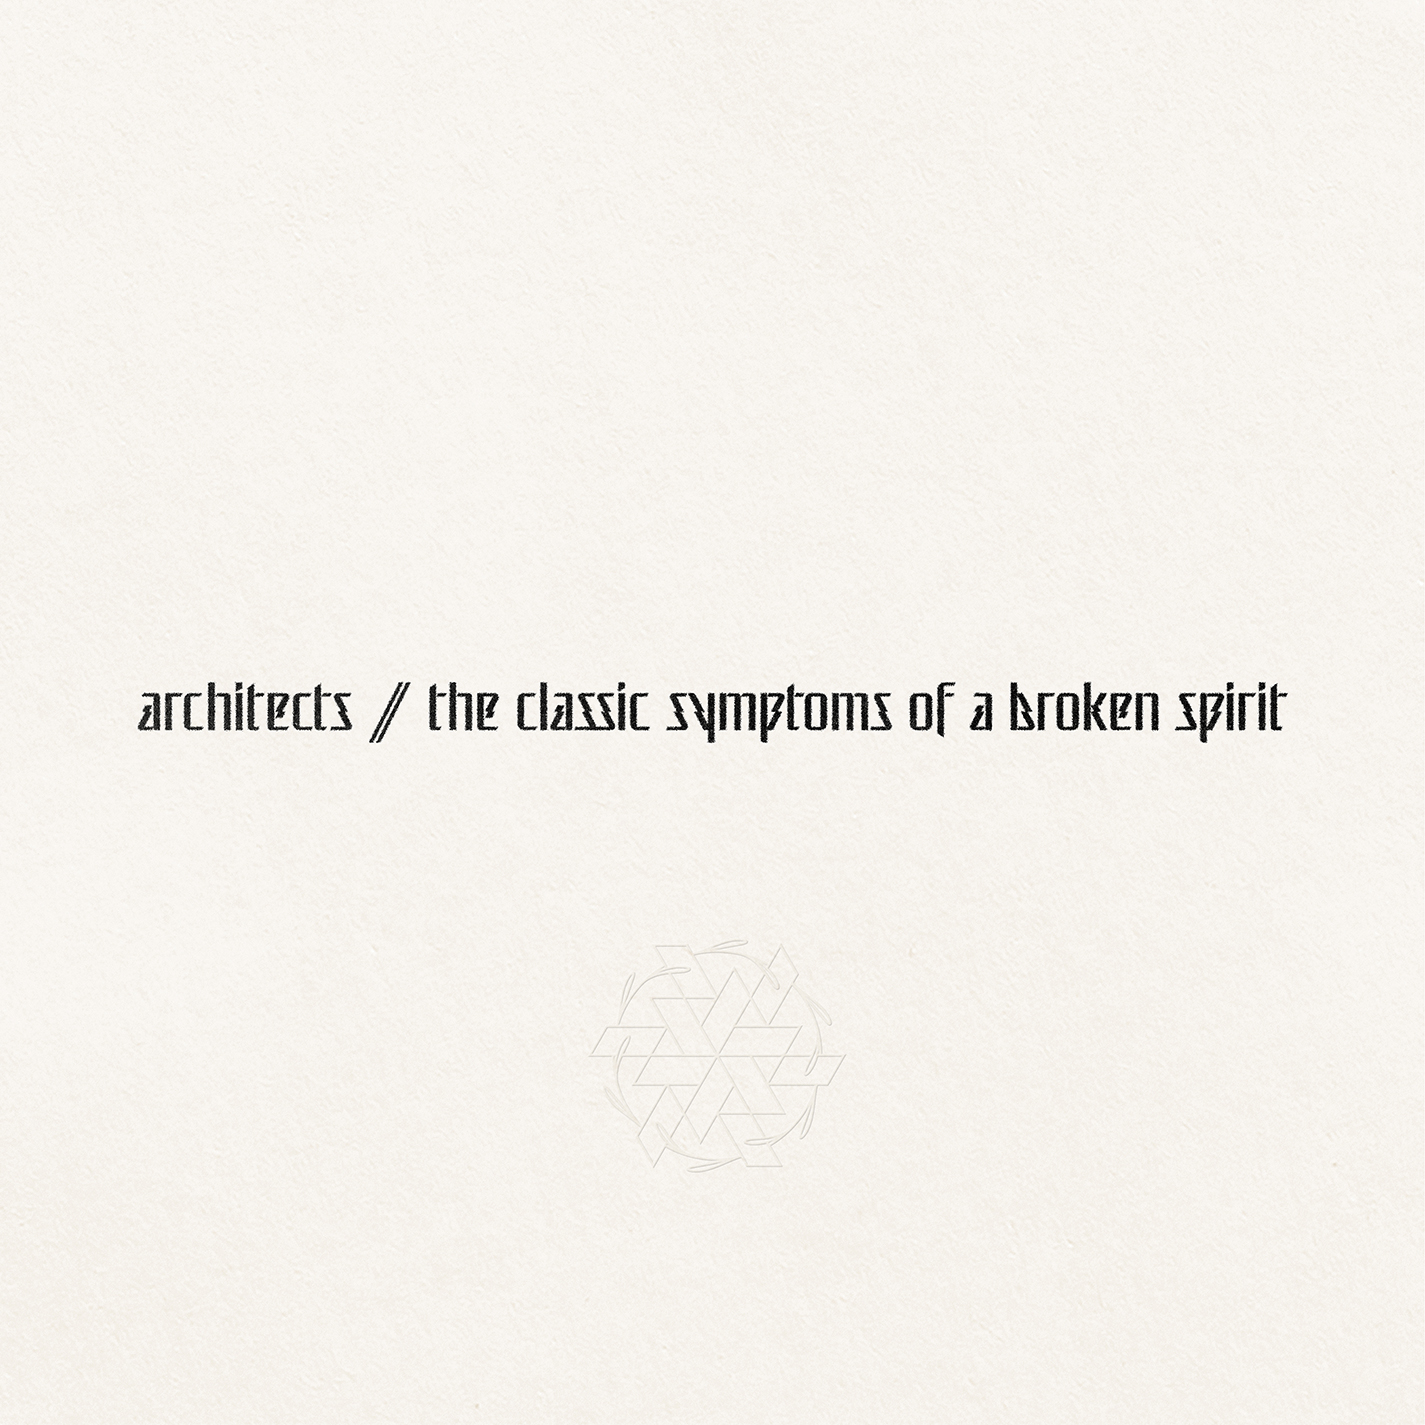 Architects - the classic symptoms of a broken sp